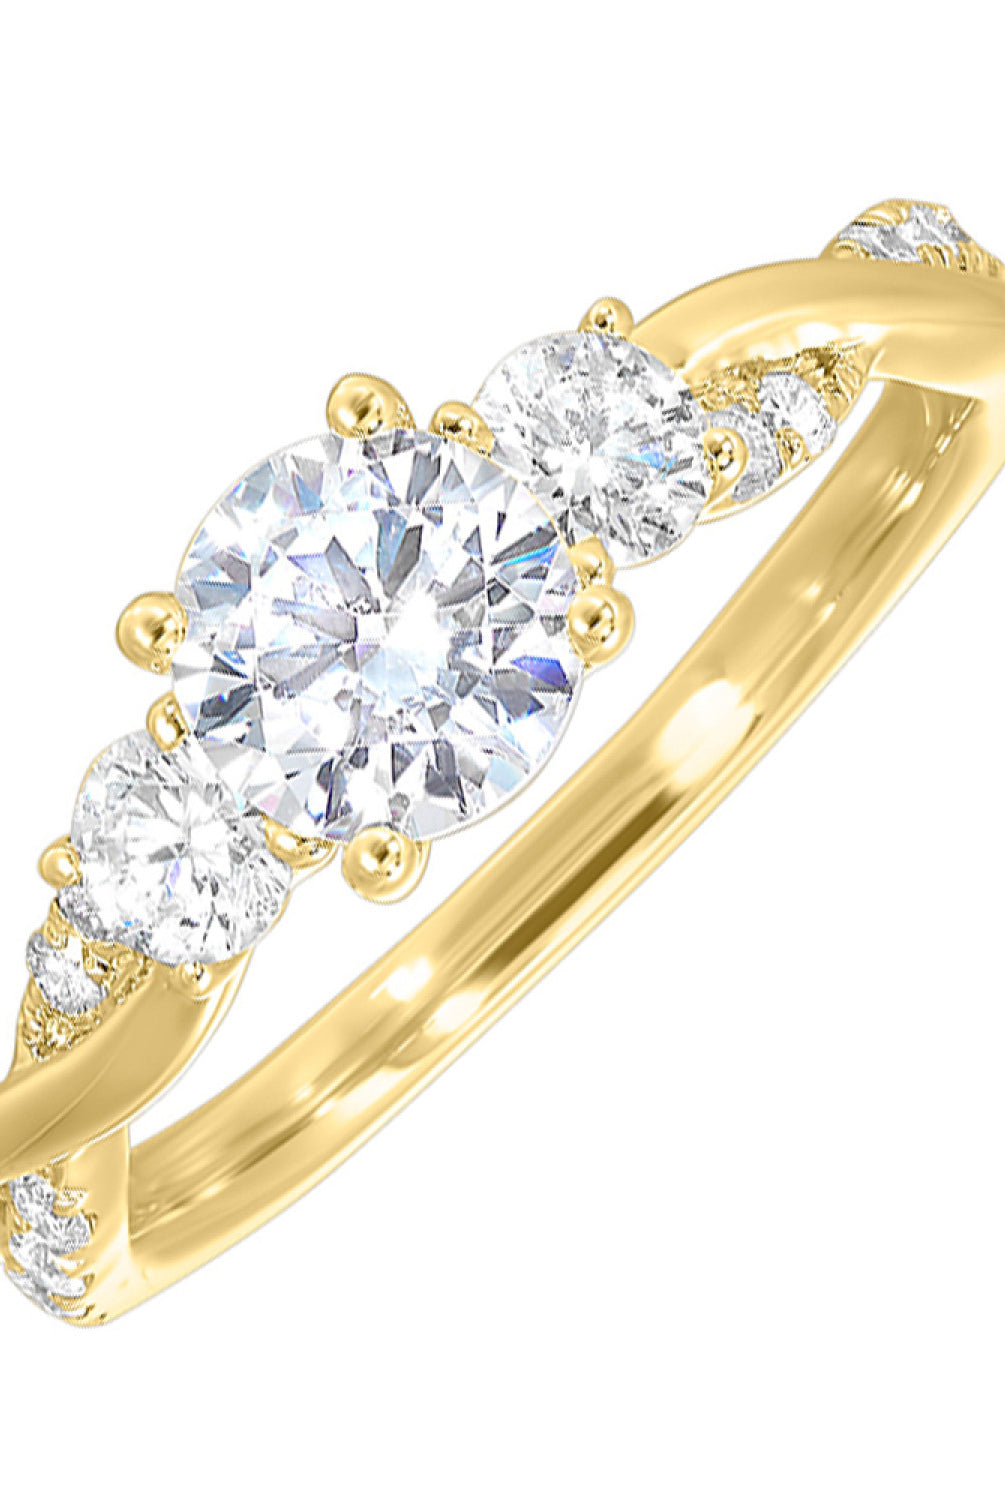 14K Yellow Gold Semi-Mount Engagement Ring with Twisted Band and Round Diamonds